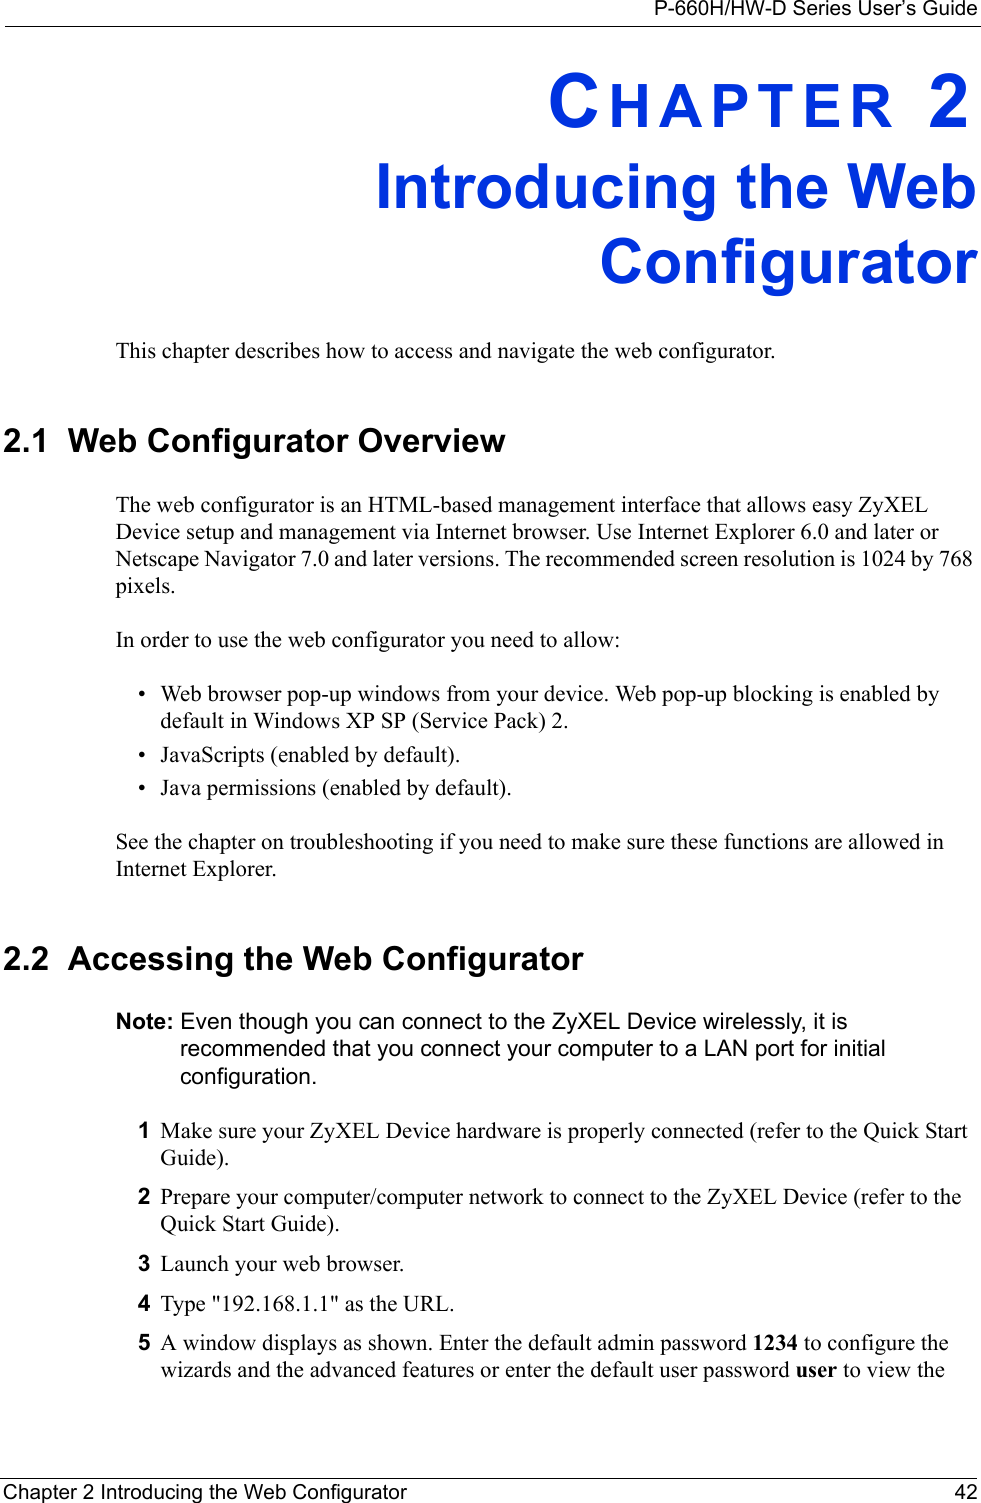 P-660H/HW-D Series User’s GuideChapter 2 Introducing the Web Configurator 42CHAPTER 2Introducing the WebConfiguratorThis chapter describes how to access and navigate the web configurator.2.1  Web Configurator OverviewThe web configurator is an HTML-based management interface that allows easy ZyXEL Device setup and management via Internet browser. Use Internet Explorer 6.0 and later or Netscape Navigator 7.0 and later versions. The recommended screen resolution is 1024 by 768 pixels.In order to use the web configurator you need to allow:• Web browser pop-up windows from your device. Web pop-up blocking is enabled by default in Windows XP SP (Service Pack) 2.• JavaScripts (enabled by default).• Java permissions (enabled by default).See the chapter on troubleshooting if you need to make sure these functions are allowed in Internet Explorer. 2.2  Accessing the Web Configurator Note: Even though you can connect to the ZyXEL Device wirelessly, it is recommended that you connect your computer to a LAN port for initial configuration.1Make sure your ZyXEL Device hardware is properly connected (refer to the Quick Start Guide).2Prepare your computer/computer network to connect to the ZyXEL Device (refer to the Quick Start Guide).3Launch your web browser.4Type &quot;192.168.1.1&quot; as the URL.5A window displays as shown. Enter the default admin password 1234 to configure the wizards and the advanced features or enter the default user password user to view the 